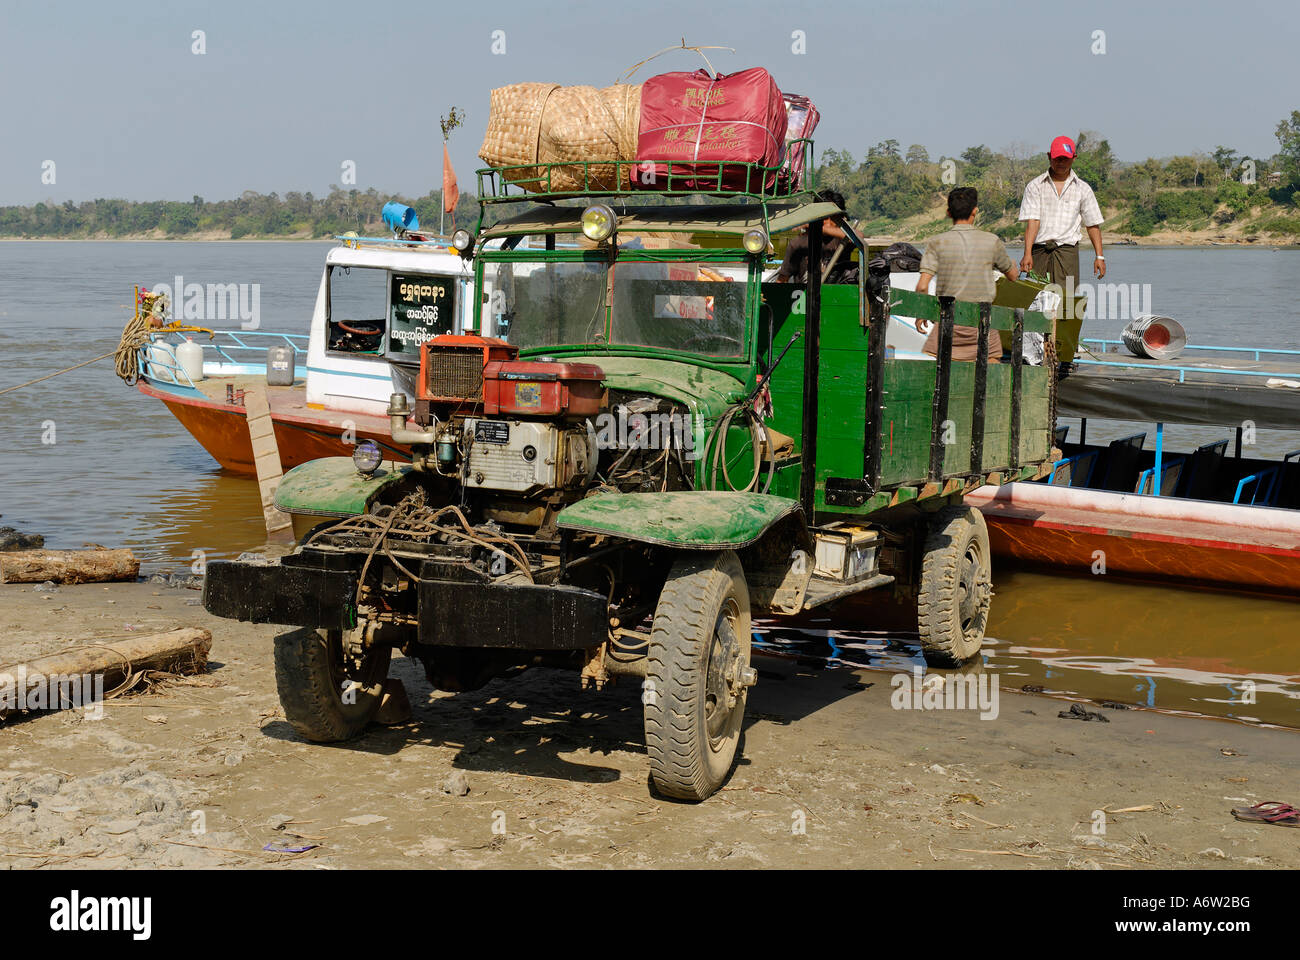 Old vehicles on the banks of the Irrawaddy river, Myanmar Stock Photo